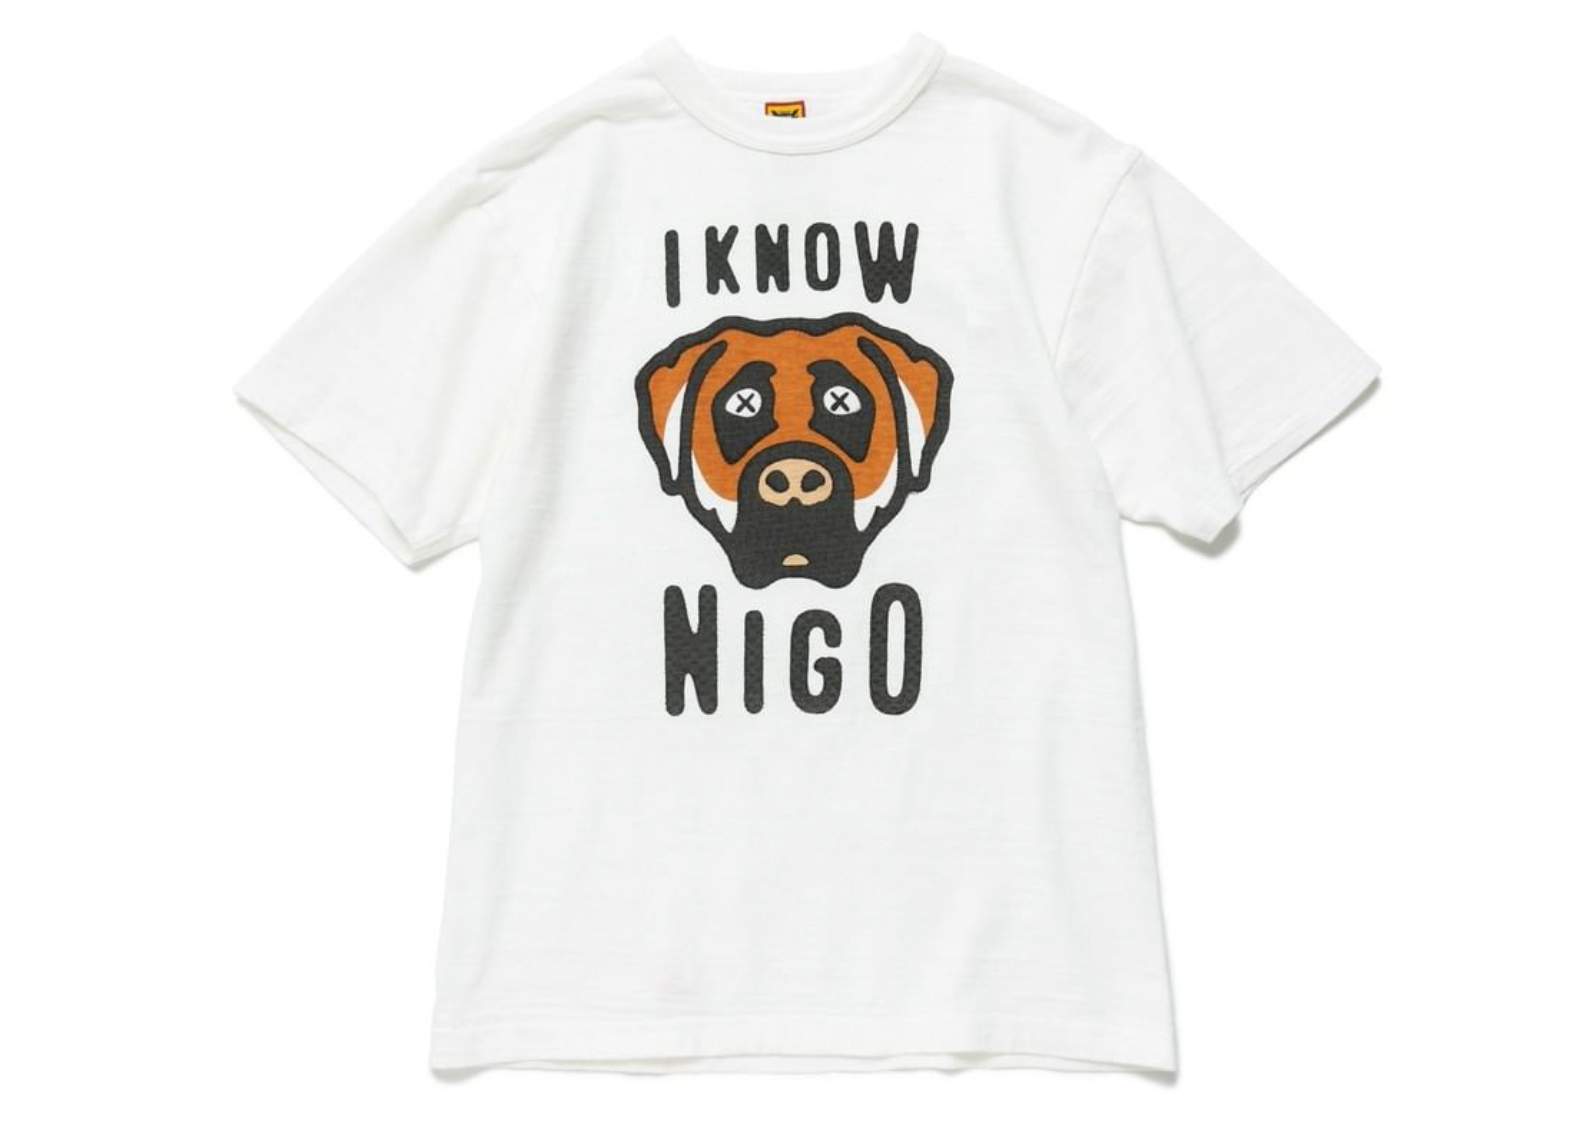 How to buy Pharrell Williams X NIGO's I Know NIGO limited edition  collection? Price, release date and more explored